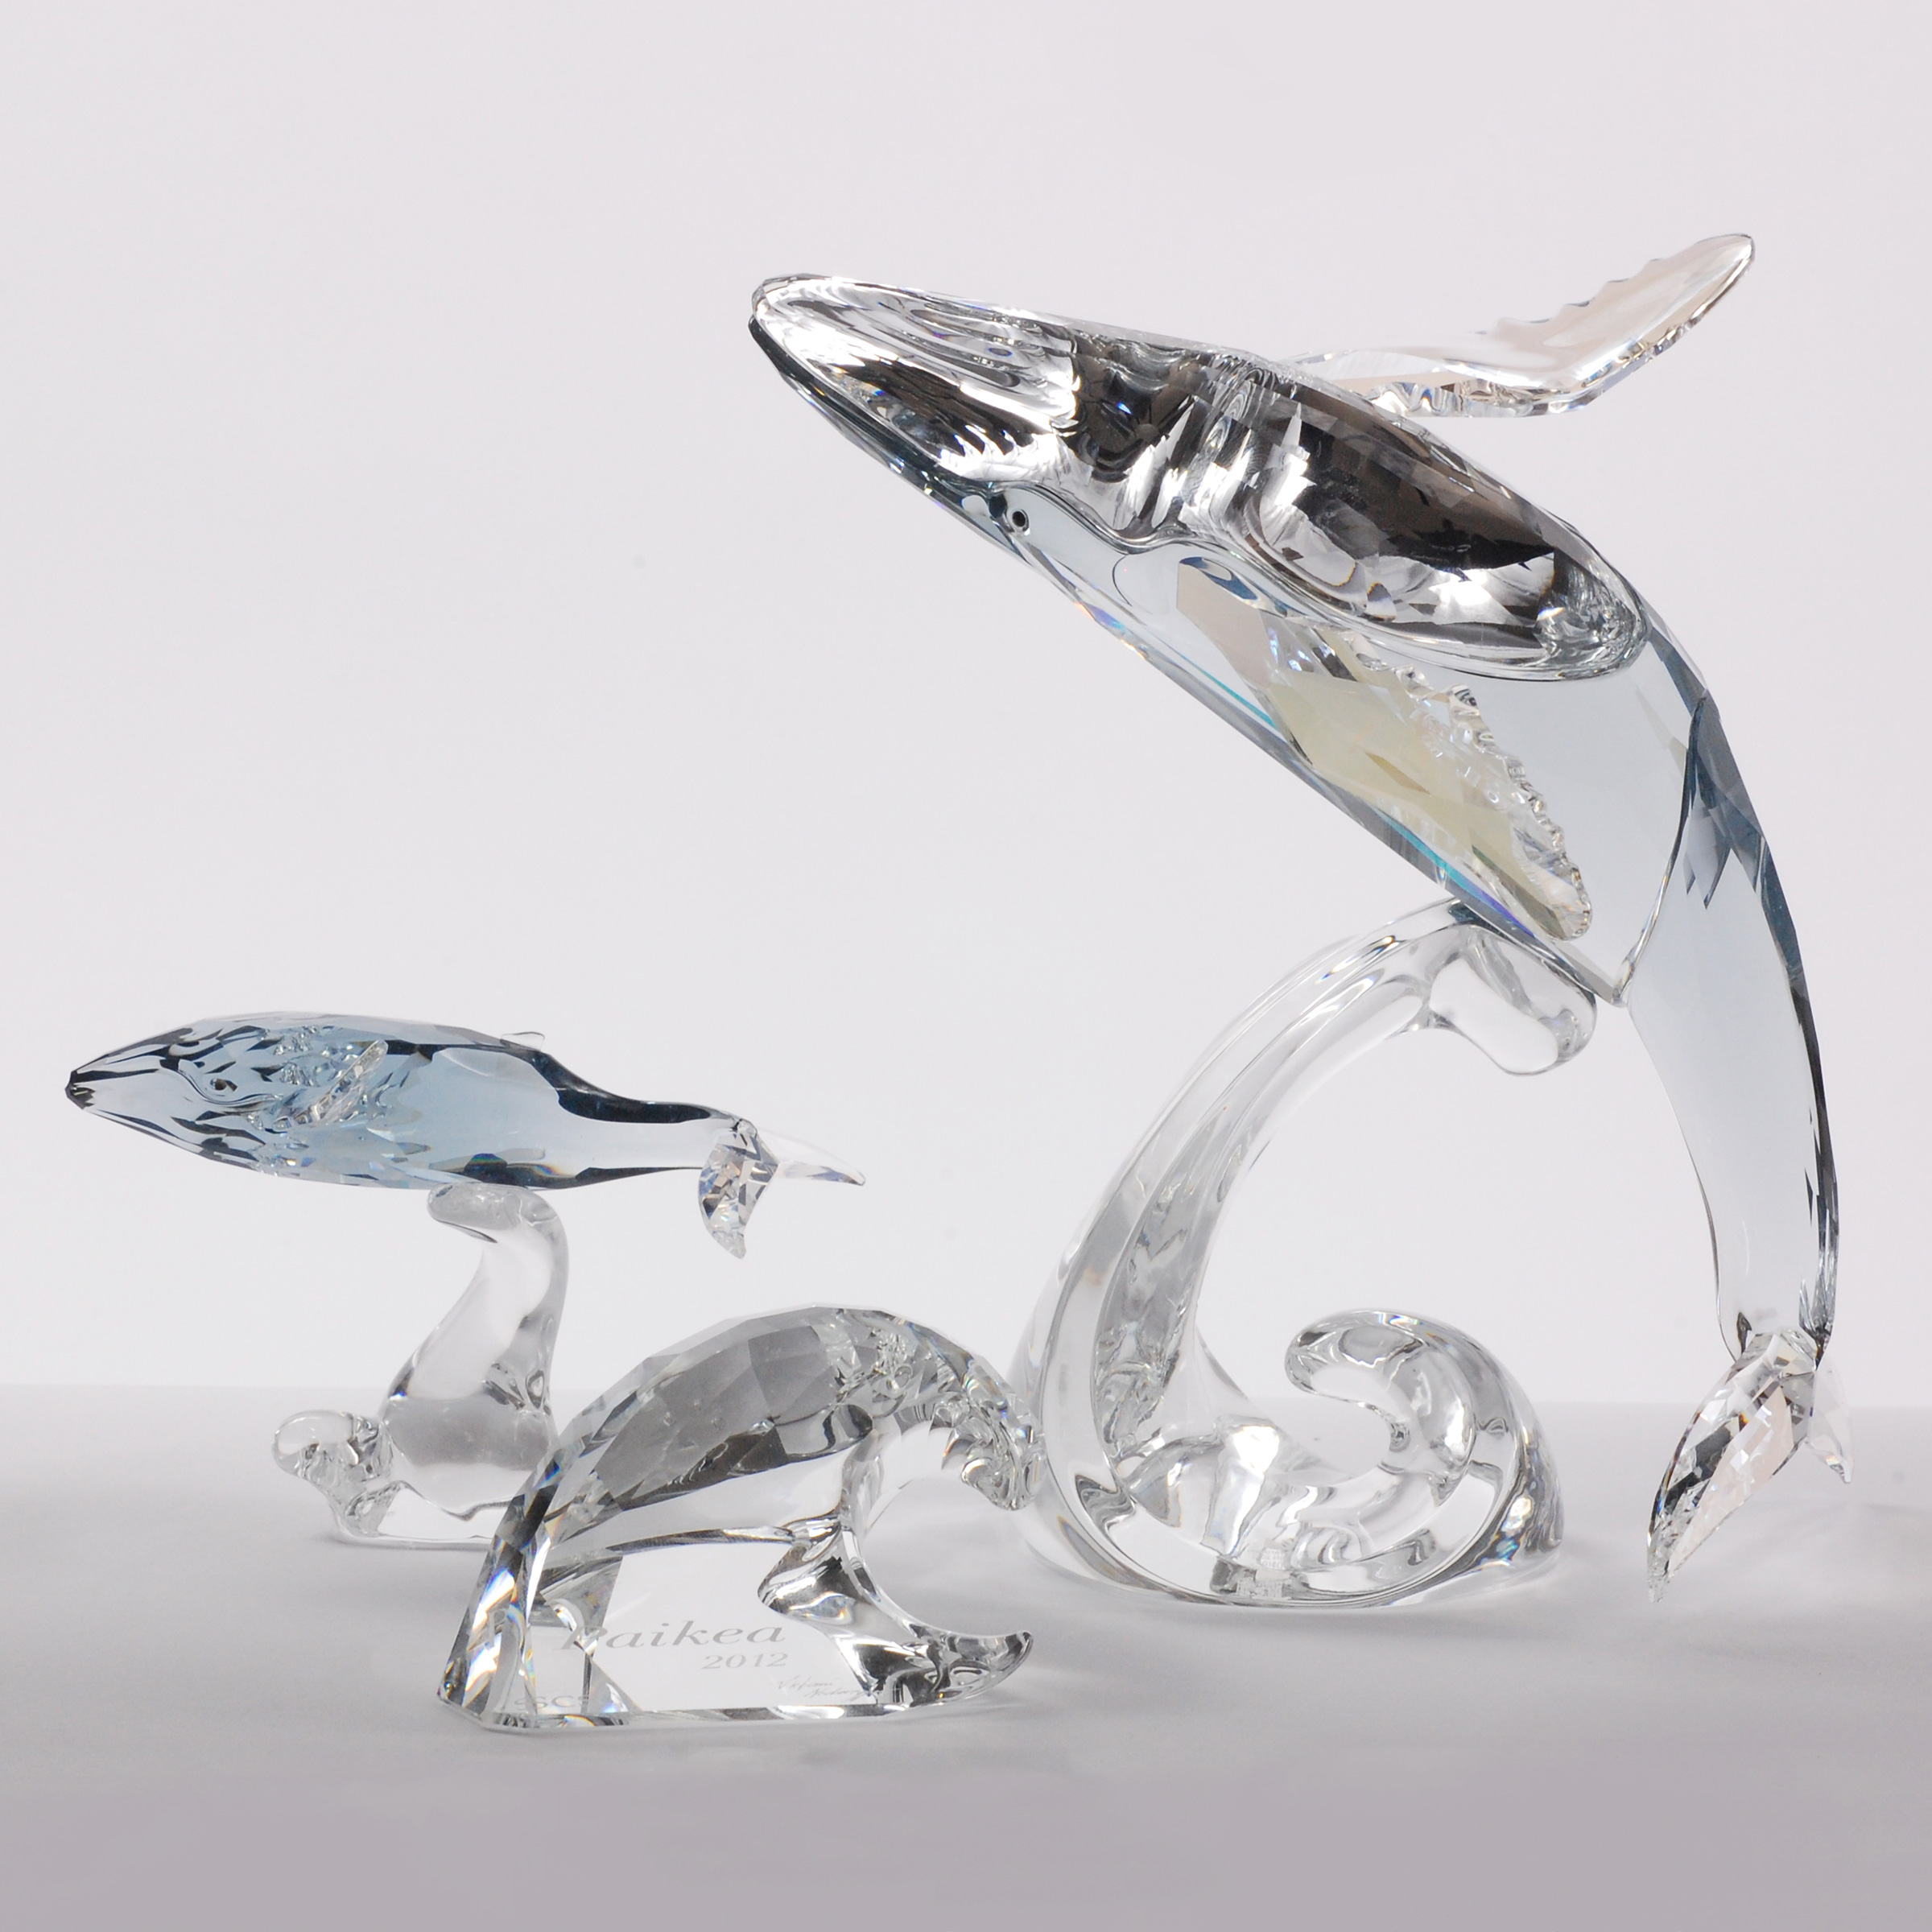 Two Swarovski Crystal Whales, early 21st century